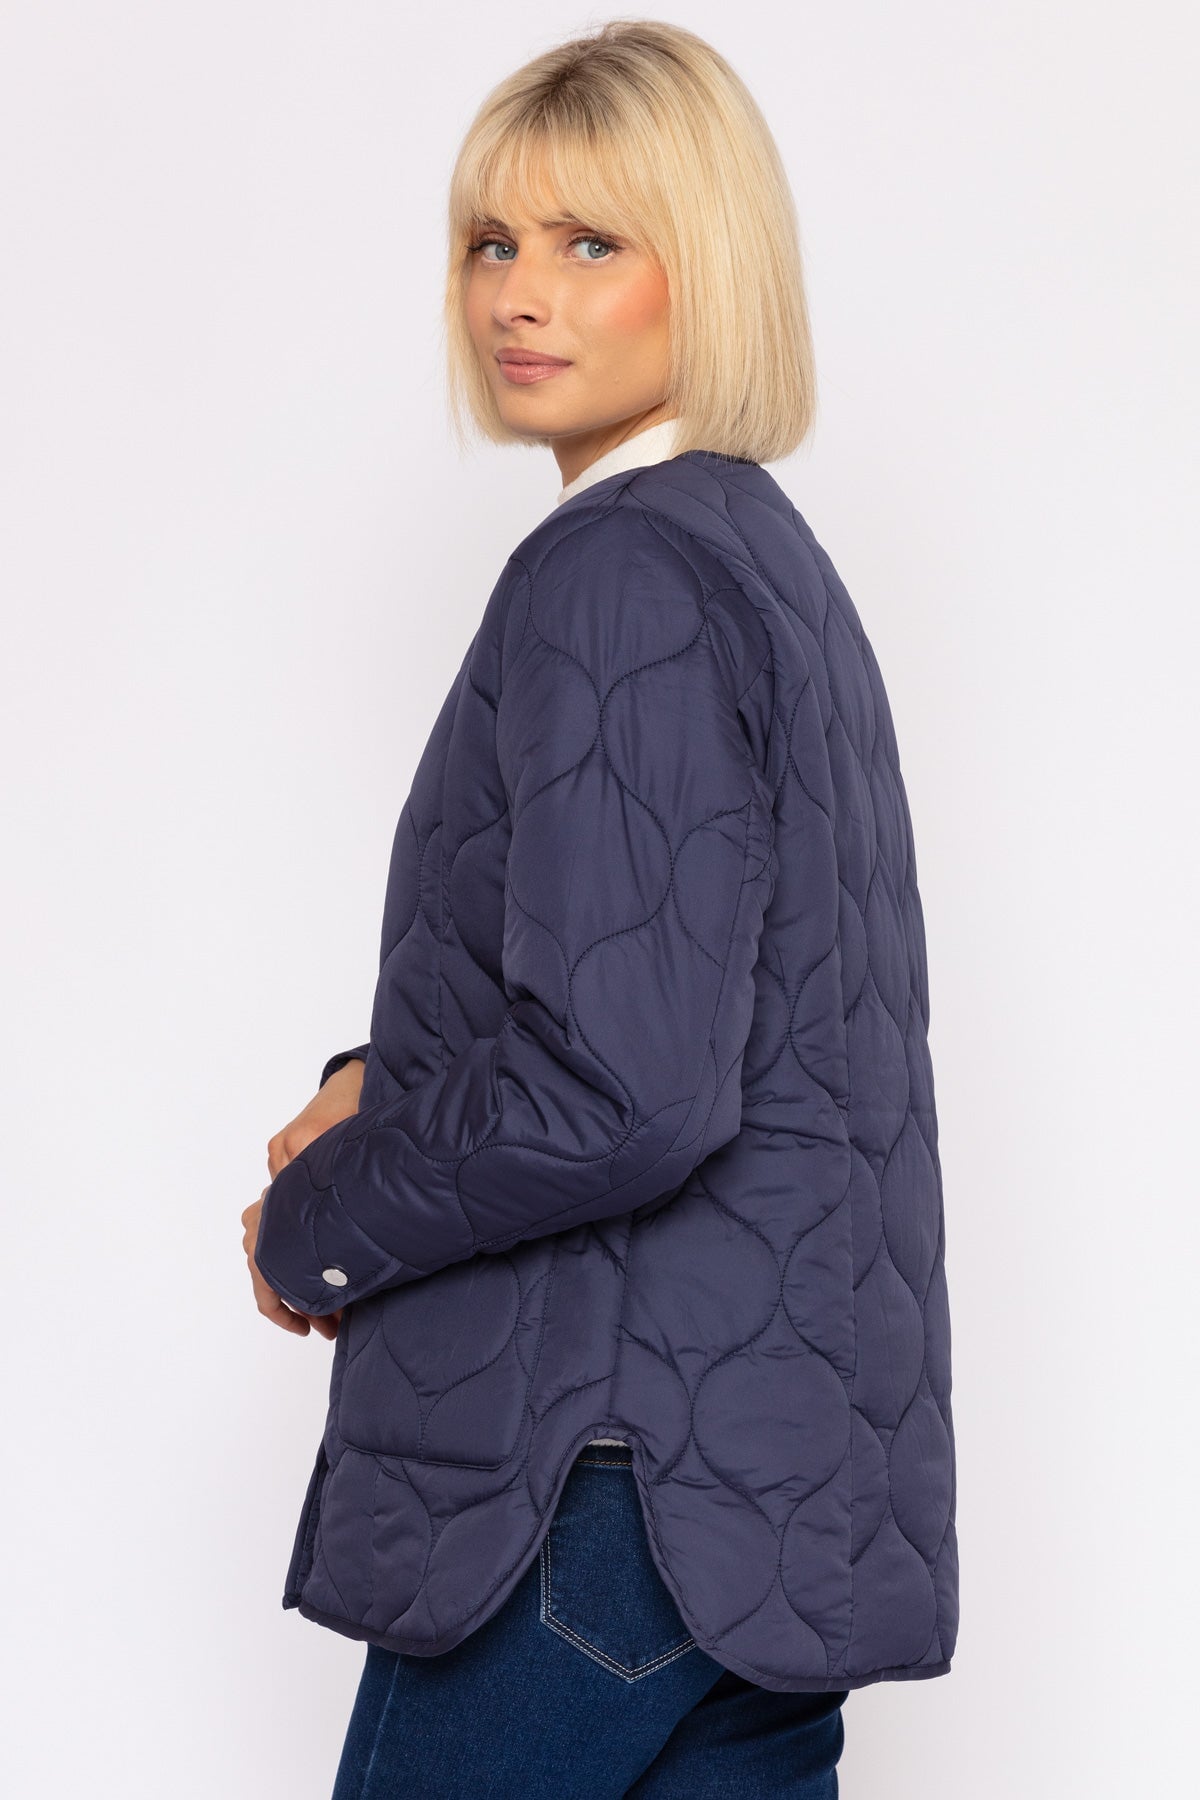 Quilted Jacket in Navy | Outerwear | Carraig Donn